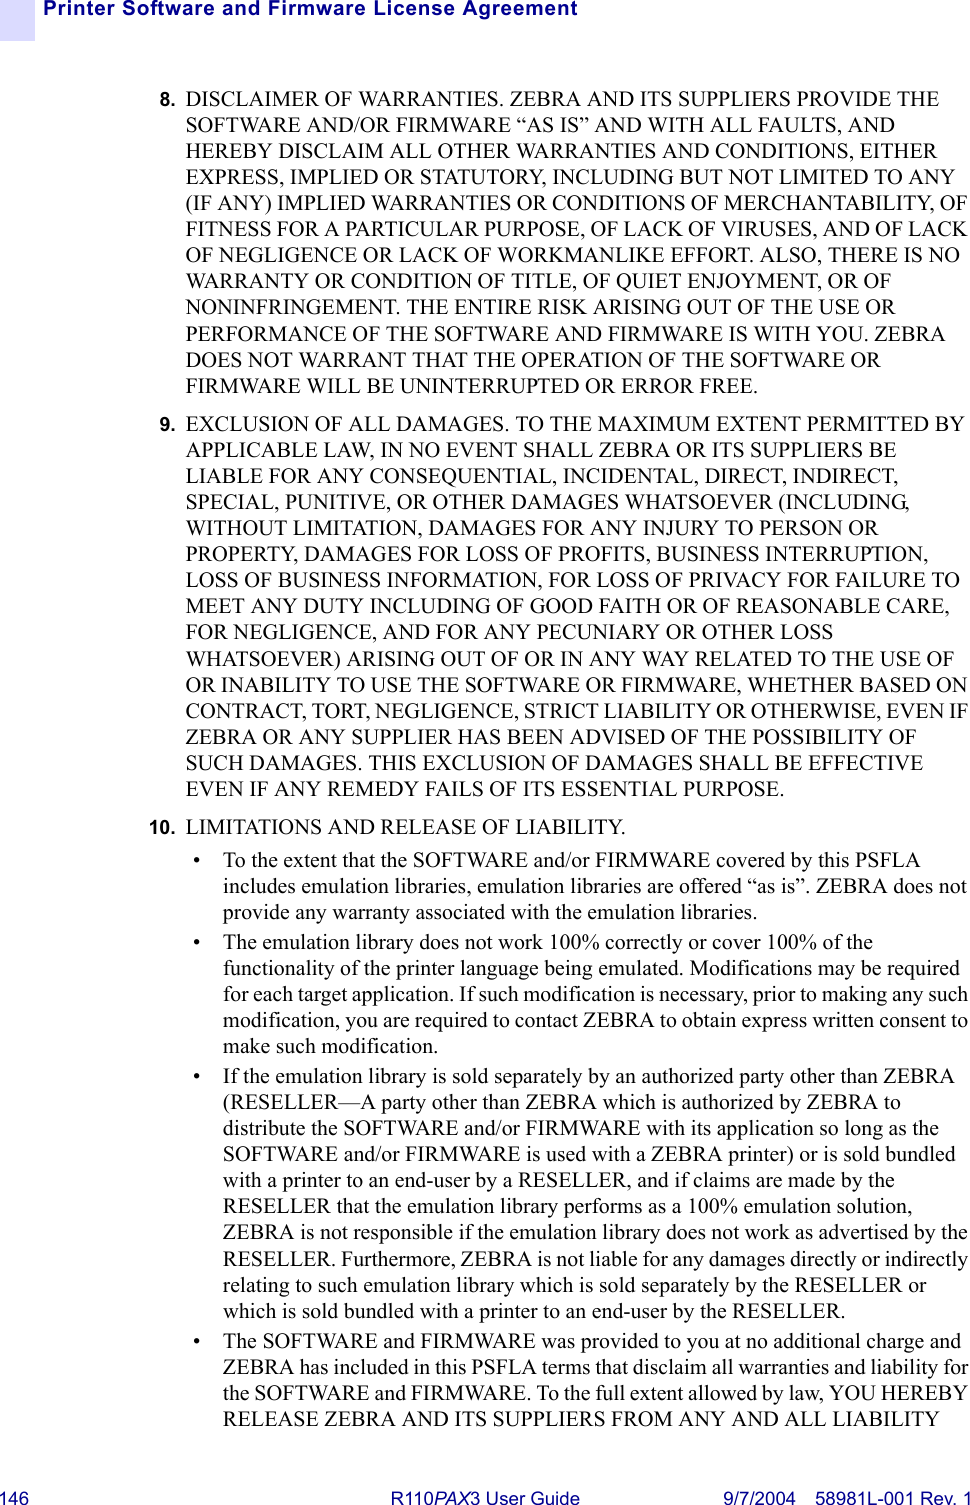 146 R110PA X3 User Guide 9/7/2004 58981L-001 Rev. 1Printer Software and Firmware License Agreement8. DISCLAIMER OF WARRANTIES. ZEBRA AND ITS SUPPLIERS PROVIDE THE SOFTWARE AND/OR FIRMWARE “AS IS” AND WITH ALL FAULTS, AND HEREBY DISCLAIM ALL OTHER WARRANTIES AND CONDITIONS, EITHER EXPRESS, IMPLIED OR STATUTORY, INCLUDING BUT NOT LIMITED TO ANY (IF ANY) IMPLIED WARRANTIES OR CONDITIONS OF MERCHANTABILITY, OF FITNESS FOR A PARTICULAR PURPOSE, OF LACK OF VIRUSES, AND OF LACK OF NEGLIGENCE OR LACK OF WORKMANLIKE EFFORT. ALSO, THERE IS NO WARRANTY OR CONDITION OF TITLE, OF QUIET ENJOYMENT, OR OF NONINFRINGEMENT. THE ENTIRE RISK ARISING OUT OF THE USE OR PERFORMANCE OF THE SOFTWARE AND FIRMWARE IS WITH YOU. ZEBRA DOES NOT WARRANT THAT THE OPERATION OF THE SOFTWARE OR FIRMWARE WILL BE UNINTERRUPTED OR ERROR FREE.9. EXCLUSION OF ALL DAMAGES. TO THE MAXIMUM EXTENT PERMITTED BY APPLICABLE LAW, IN NO EVENT SHALL ZEBRA OR ITS SUPPLIERS BE LIABLE FOR ANY CONSEQUENTIAL, INCIDENTAL, DIRECT, INDIRECT, SPECIAL, PUNITIVE, OR OTHER DAMAGES WHATSOEVER (INCLUDING, WITHOUT LIMITATION, DAMAGES FOR ANY INJURY TO PERSON OR PROPERTY, DAMAGES FOR LOSS OF PROFITS, BUSINESS INTERRUPTION, LOSS OF BUSINESS INFORMATION, FOR LOSS OF PRIVACY FOR FAILURE TO MEET ANY DUTY INCLUDING OF GOOD FAITH OR OF REASONABLE CARE, FOR NEGLIGENCE, AND FOR ANY PECUNIARY OR OTHER LOSS WHATSOEVER) ARISING OUT OF OR IN ANY WAY RELATED TO THE USE OF OR INABILITY TO USE THE SOFTWARE OR FIRMWARE, WHETHER BASED ON CONTRACT, TORT, NEGLIGENCE, STRICT LIABILITY OR OTHERWISE, EVEN IF ZEBRA OR ANY SUPPLIER HAS BEEN ADVISED OF THE POSSIBILITY OF SUCH DAMAGES. THIS EXCLUSION OF DAMAGES SHALL BE EFFECTIVE EVEN IF ANY REMEDY FAILS OF ITS ESSENTIAL PURPOSE.10. LIMITATIONS AND RELEASE OF LIABILITY.• To the extent that the SOFTWARE and/or FIRMWARE covered by this PSFLA includes emulation libraries, emulation libraries are offered “as is”. ZEBRA does not provide any warranty associated with the emulation libraries.• The emulation library does not work 100% correctly or cover 100% of the functionality of the printer language being emulated. Modifications may be required for each target application. If such modification is necessary, prior to making any such modification, you are required to contact ZEBRA to obtain express written consent to make such modification.• If the emulation library is sold separately by an authorized party other than ZEBRA (RESELLER—A party other than ZEBRA which is authorized by ZEBRA to distribute the SOFTWARE and/or FIRMWARE with its application so long as the SOFTWARE and/or FIRMWARE is used with a ZEBRA printer) or is sold bundled with a printer to an end-user by a RESELLER, and if claims are made by the RESELLER that the emulation library performs as a 100% emulation solution, ZEBRA is not responsible if the emulation library does not work as advertised by the RESELLER. Furthermore, ZEBRA is not liable for any damages directly or indirectly relating to such emulation library which is sold separately by the RESELLER or which is sold bundled with a printer to an end-user by the RESELLER.• The SOFTWARE and FIRMWARE was provided to you at no additional charge and ZEBRA has included in this PSFLA terms that disclaim all warranties and liability for the SOFTWARE and FIRMWARE. To the full extent allowed by law, YOU HEREBY RELEASE ZEBRA AND ITS SUPPLIERS FROM ANY AND ALL LIABILITY 